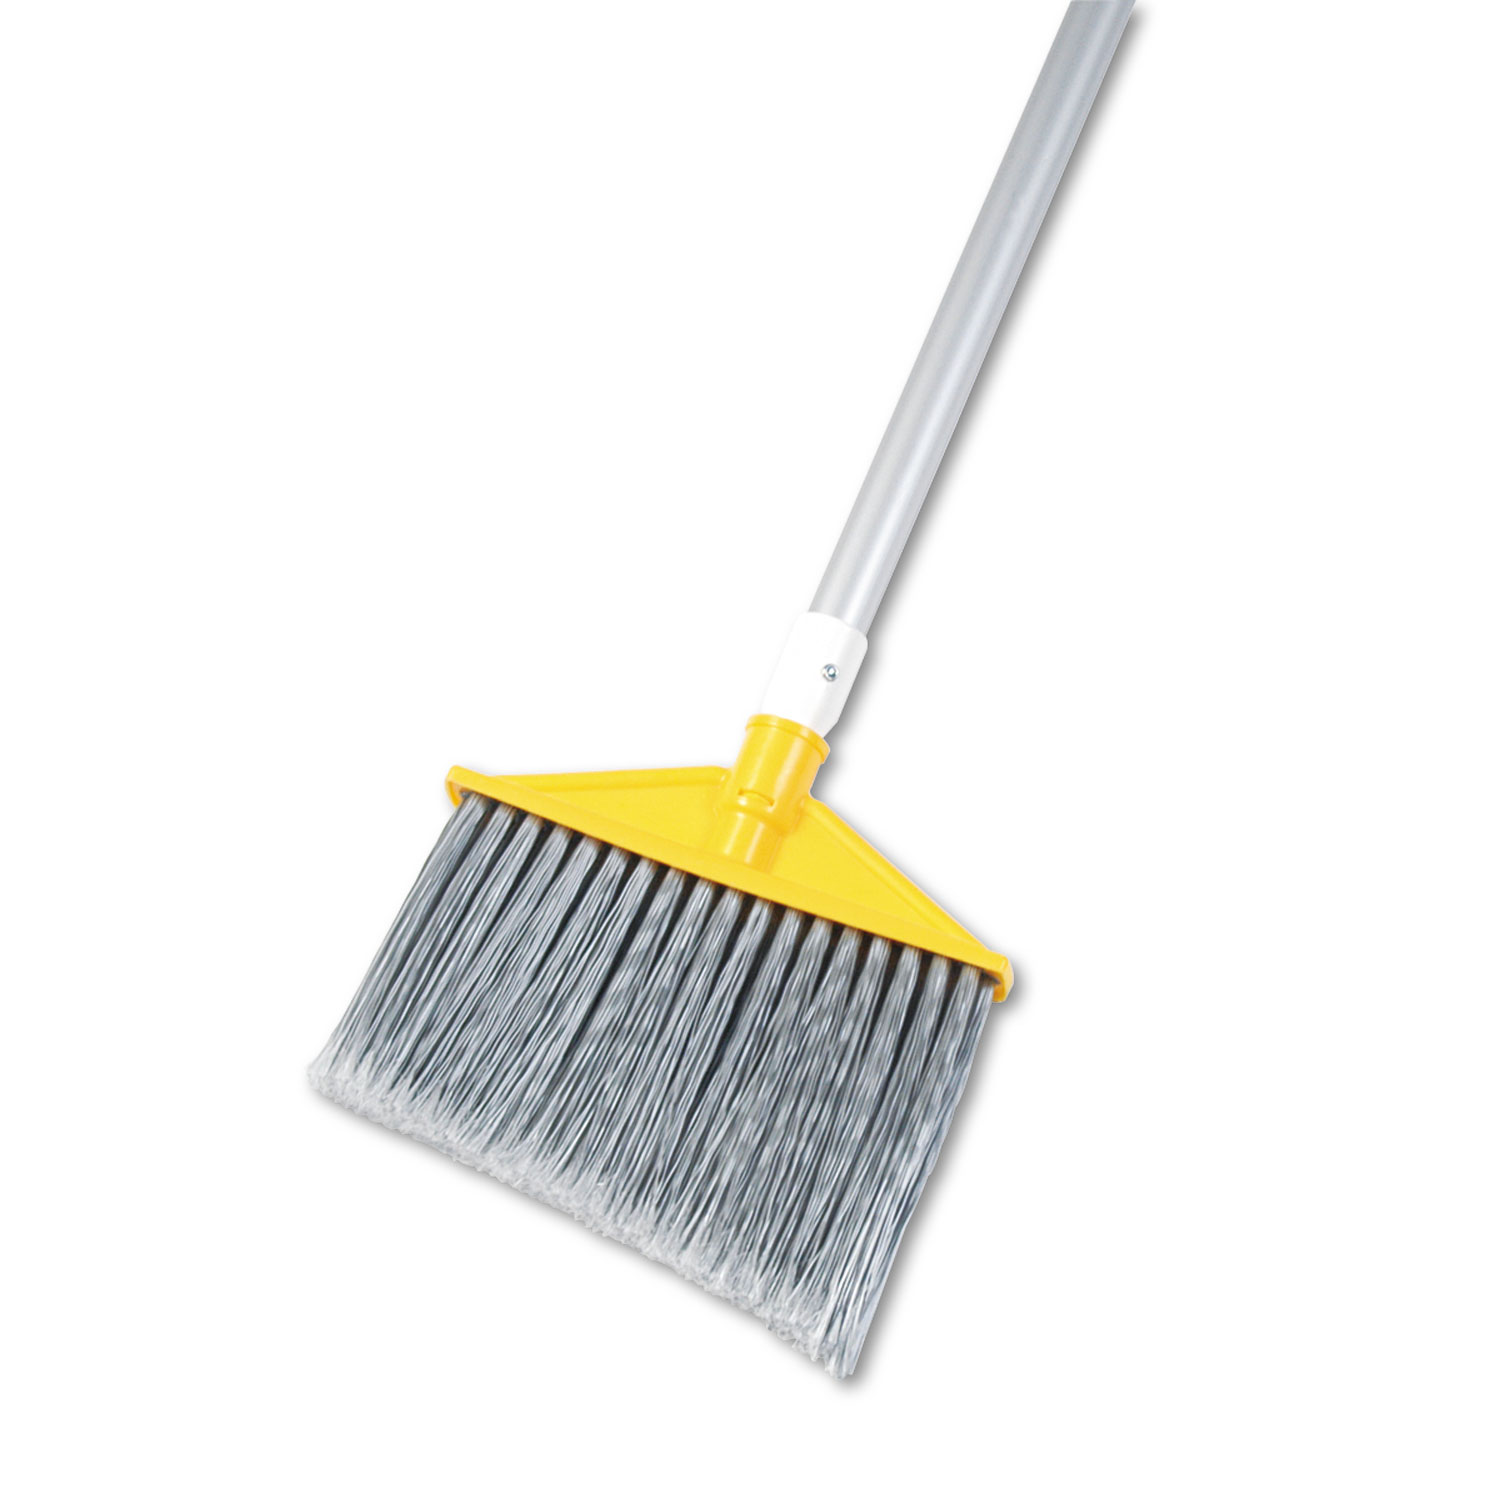 Angled Large Brooms, Poly Bristles, 48 7/8 Aluminum Handle, Silver/Gray